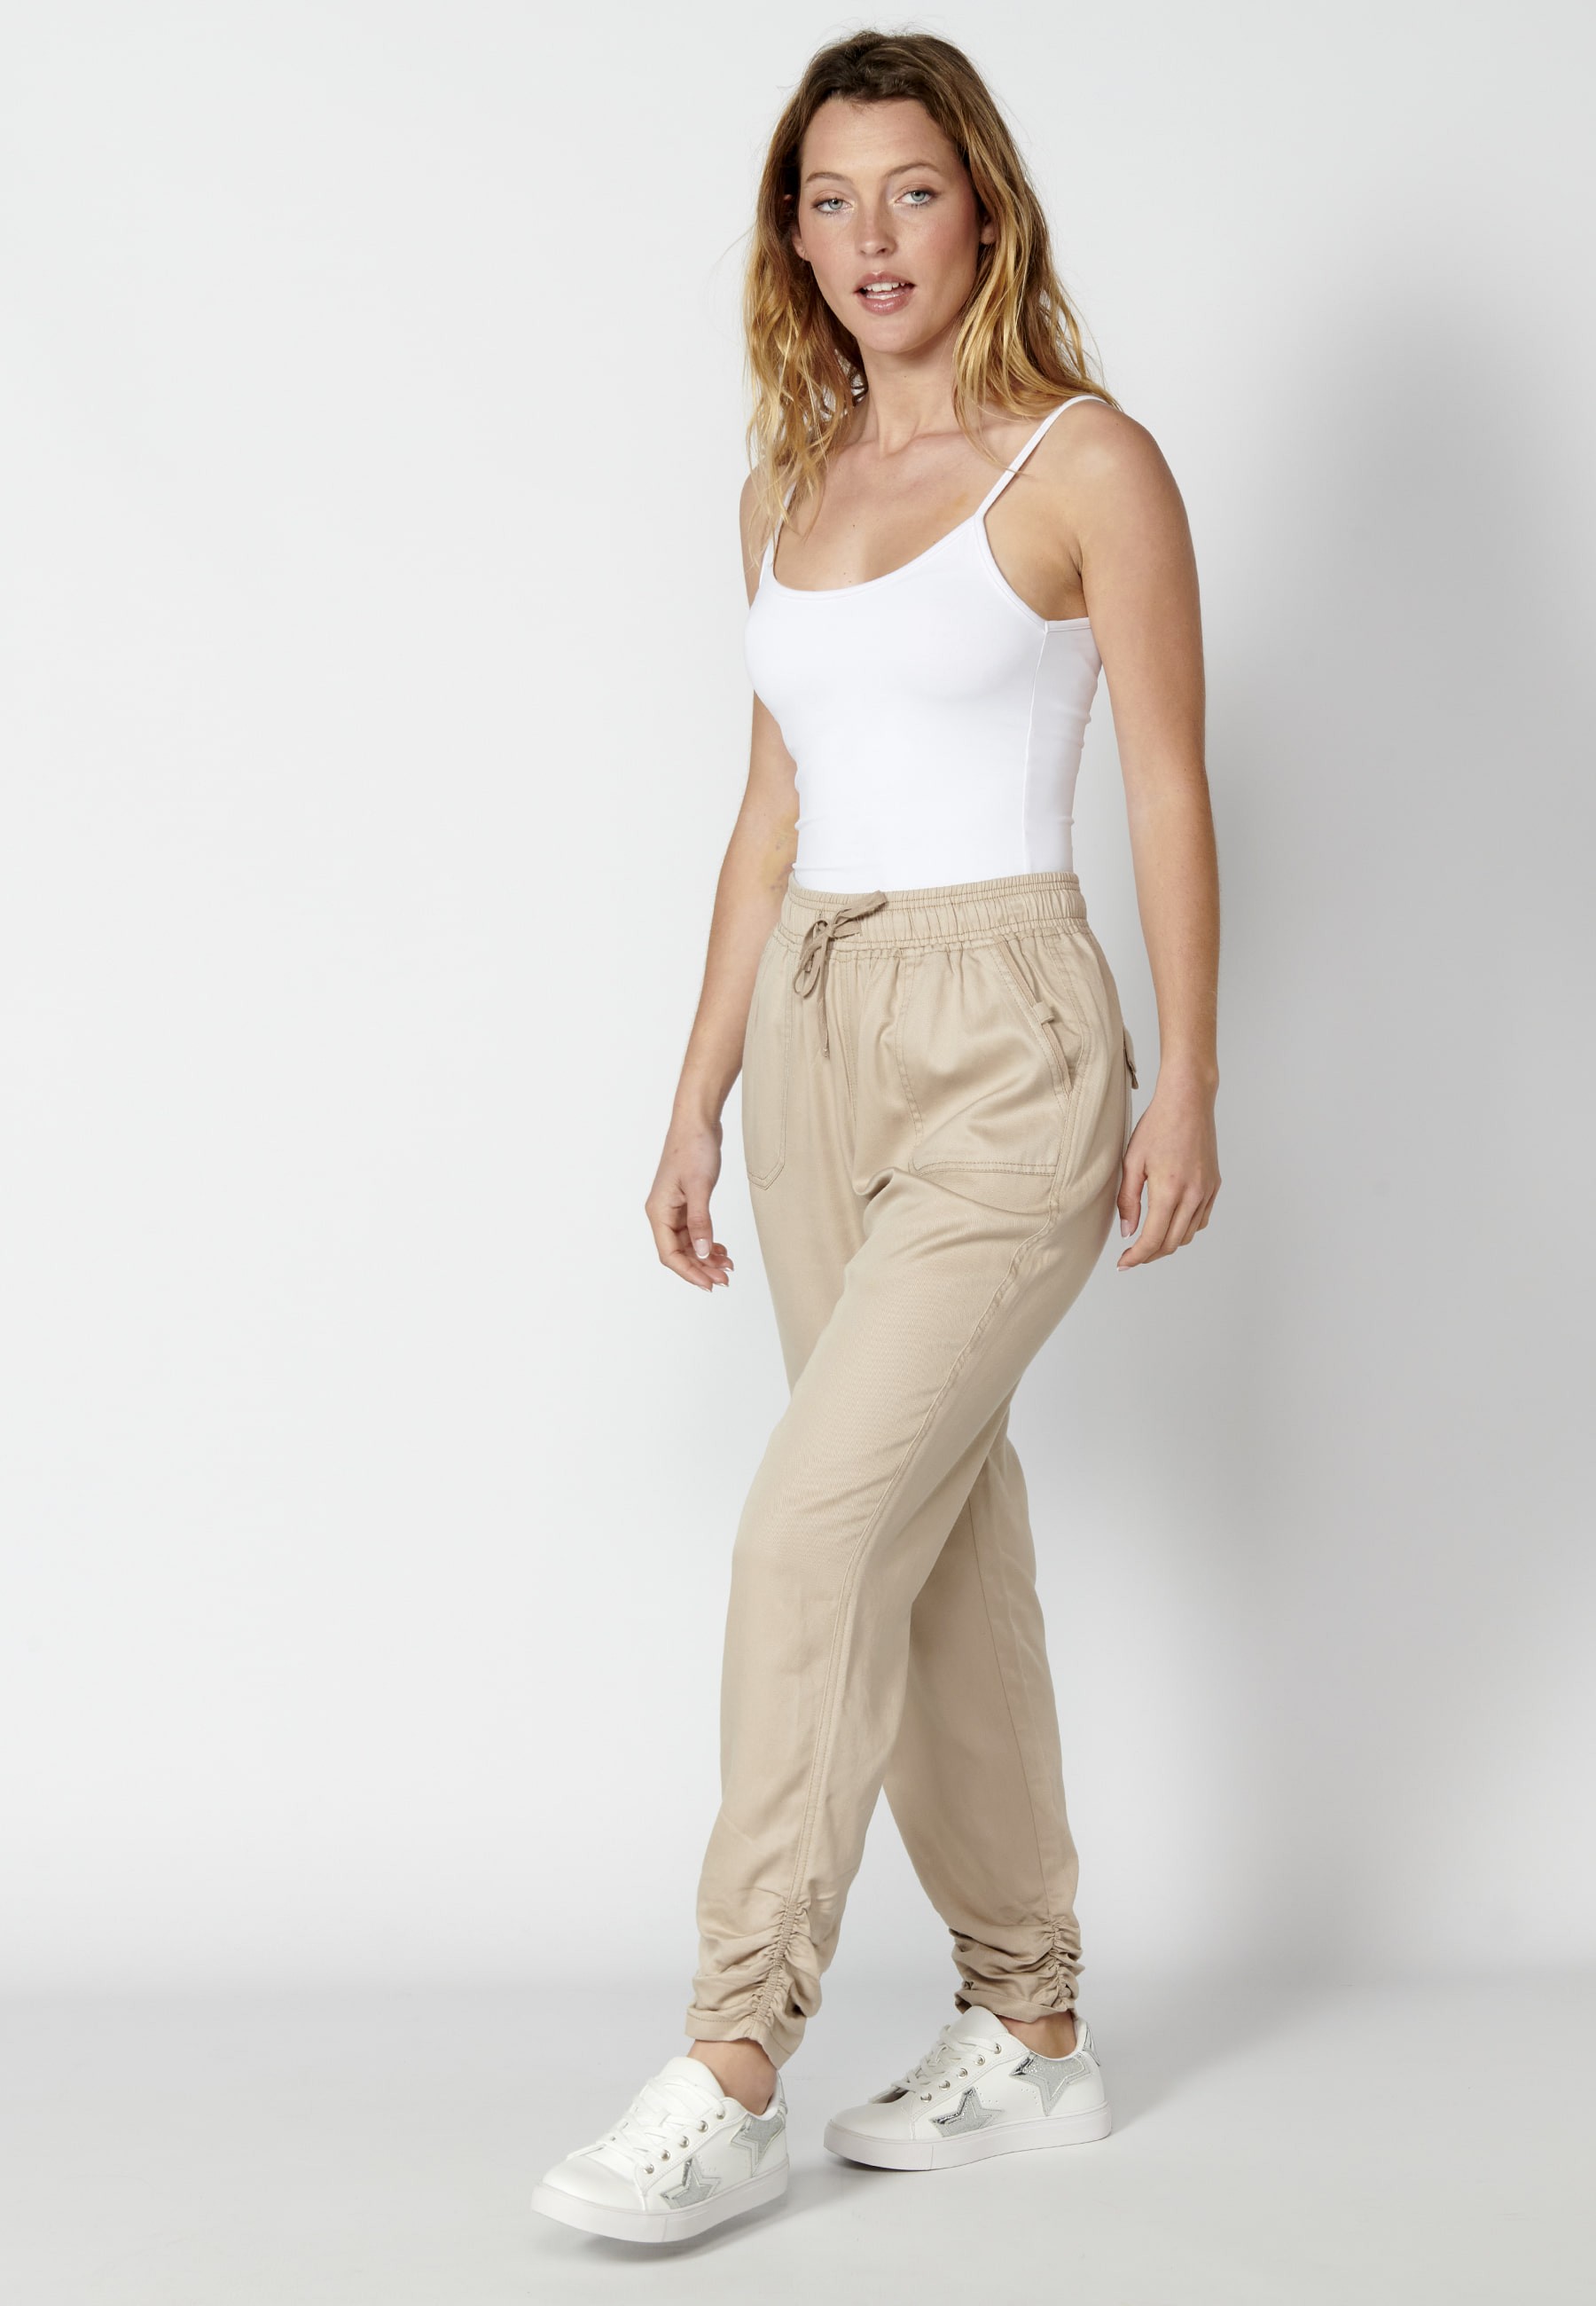 Long pants with adjustable waist in Beige color for Woman